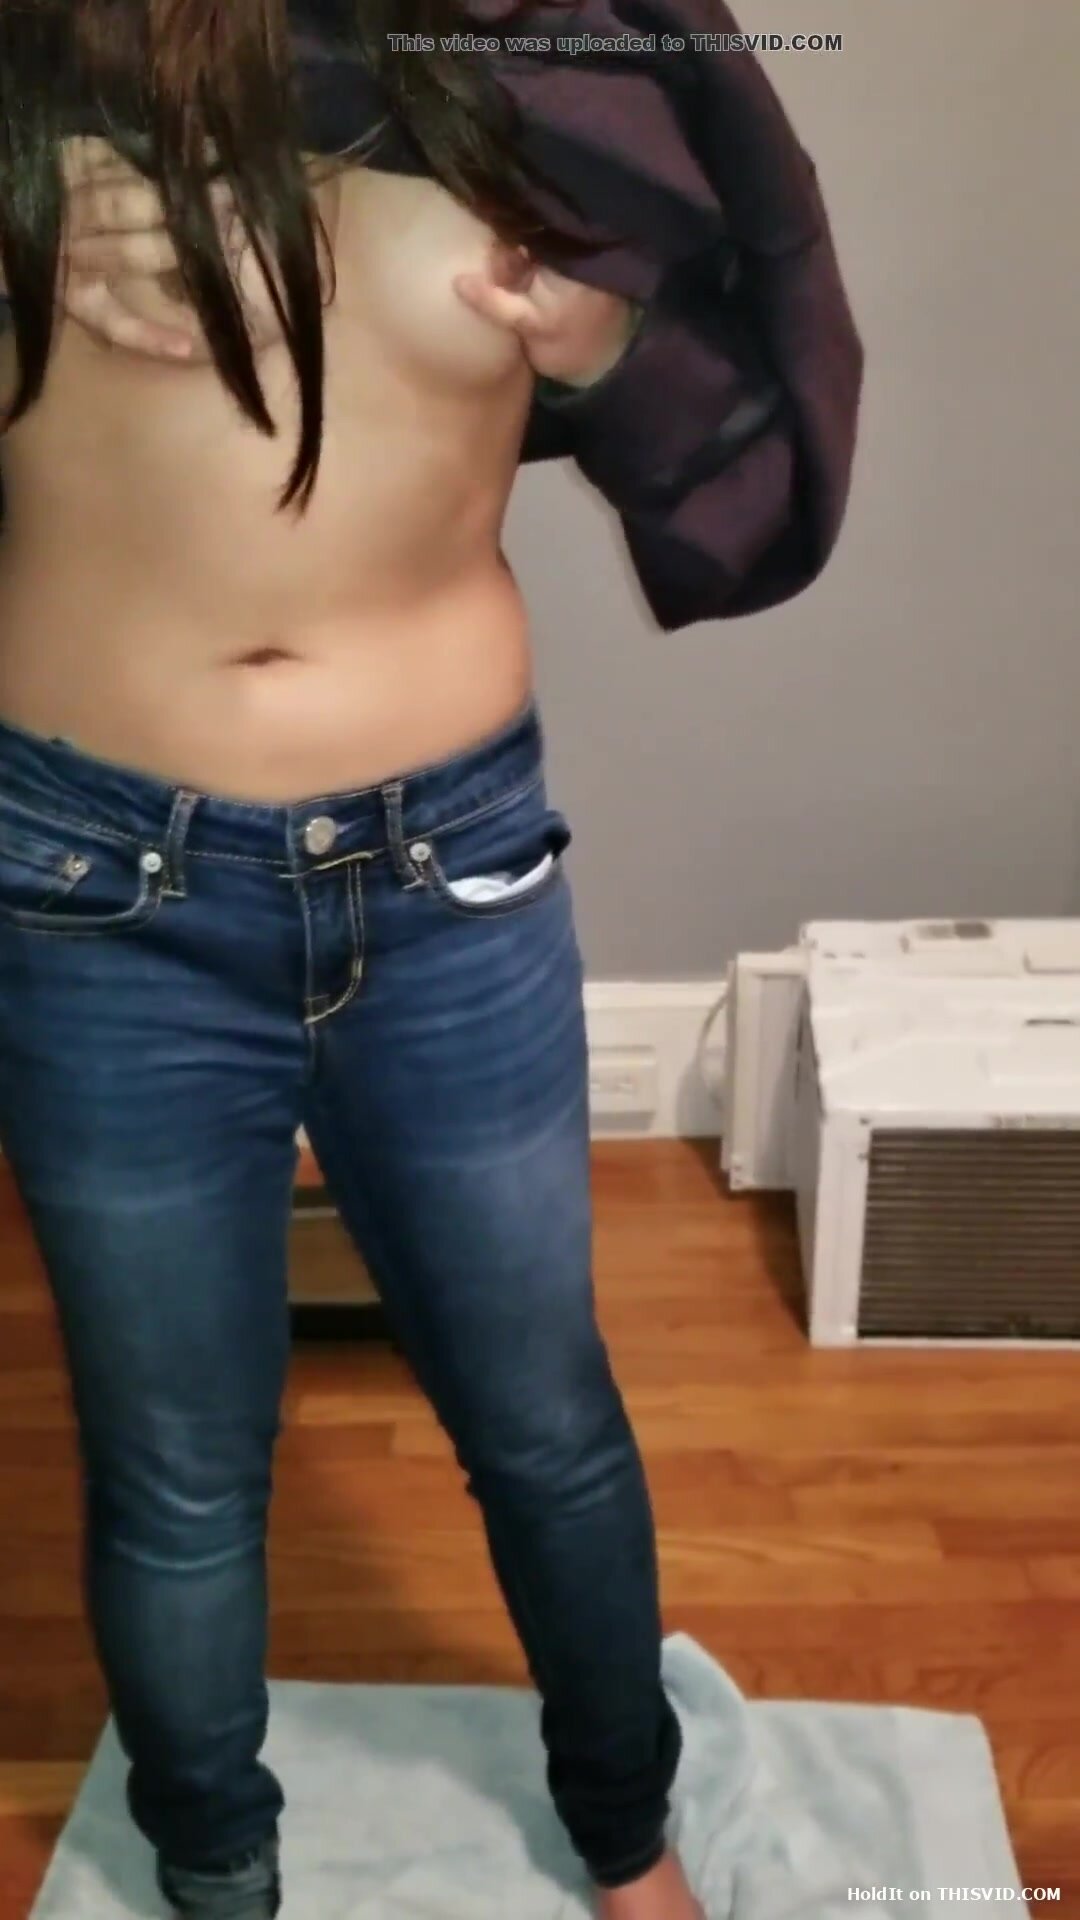 Pissing her jeans - video 11